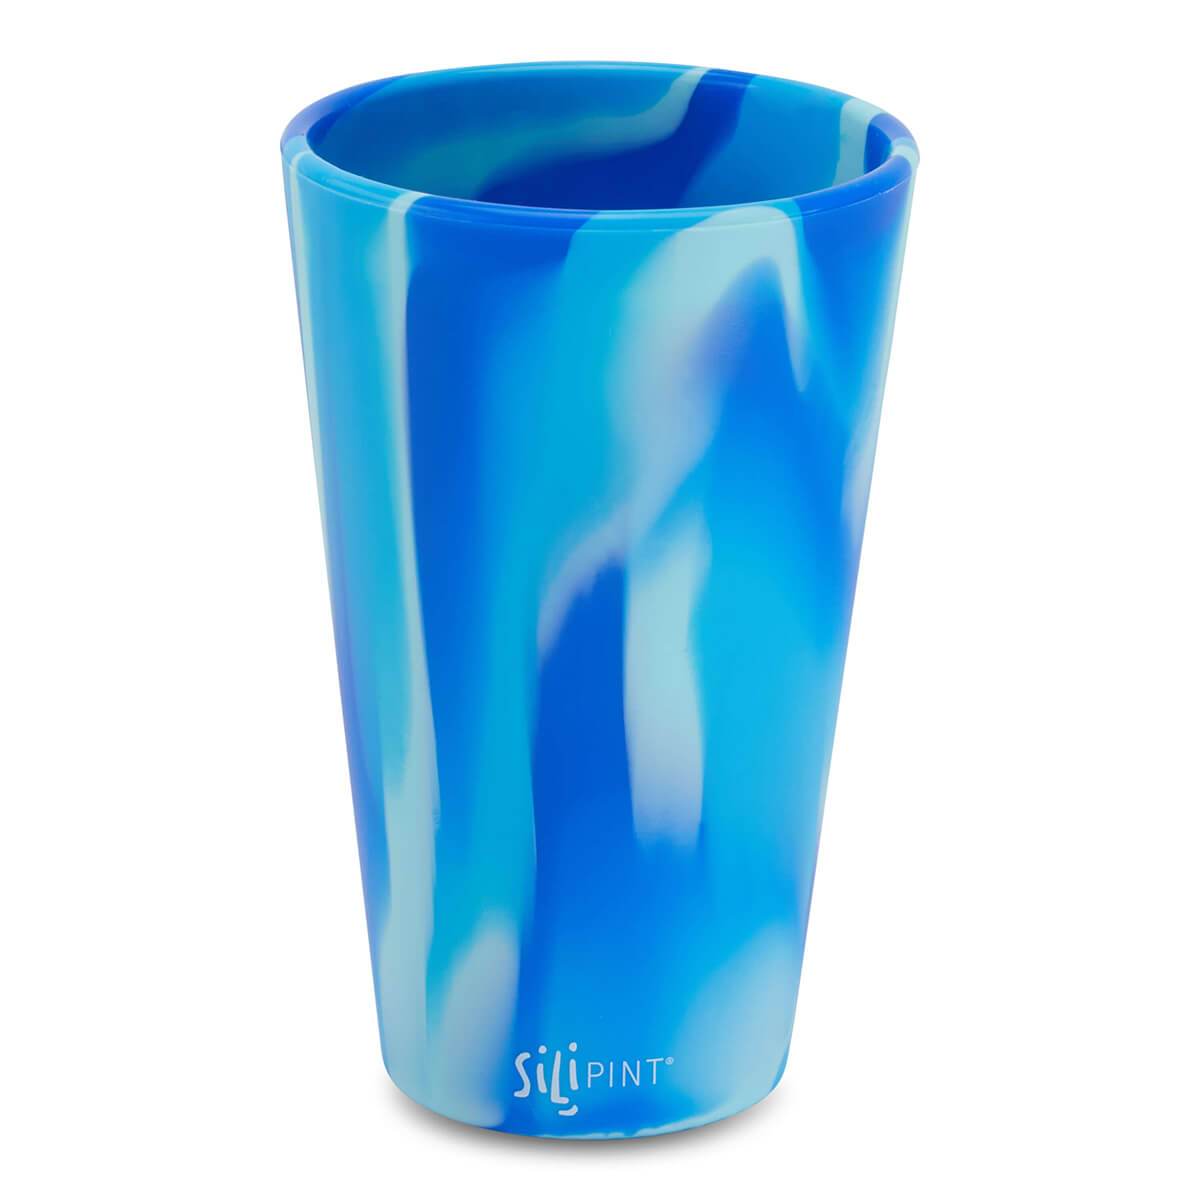 Sili Pint 16 Oz Silicone Cup Tie Dye Unbreakable Tumbler Hot Or Cold